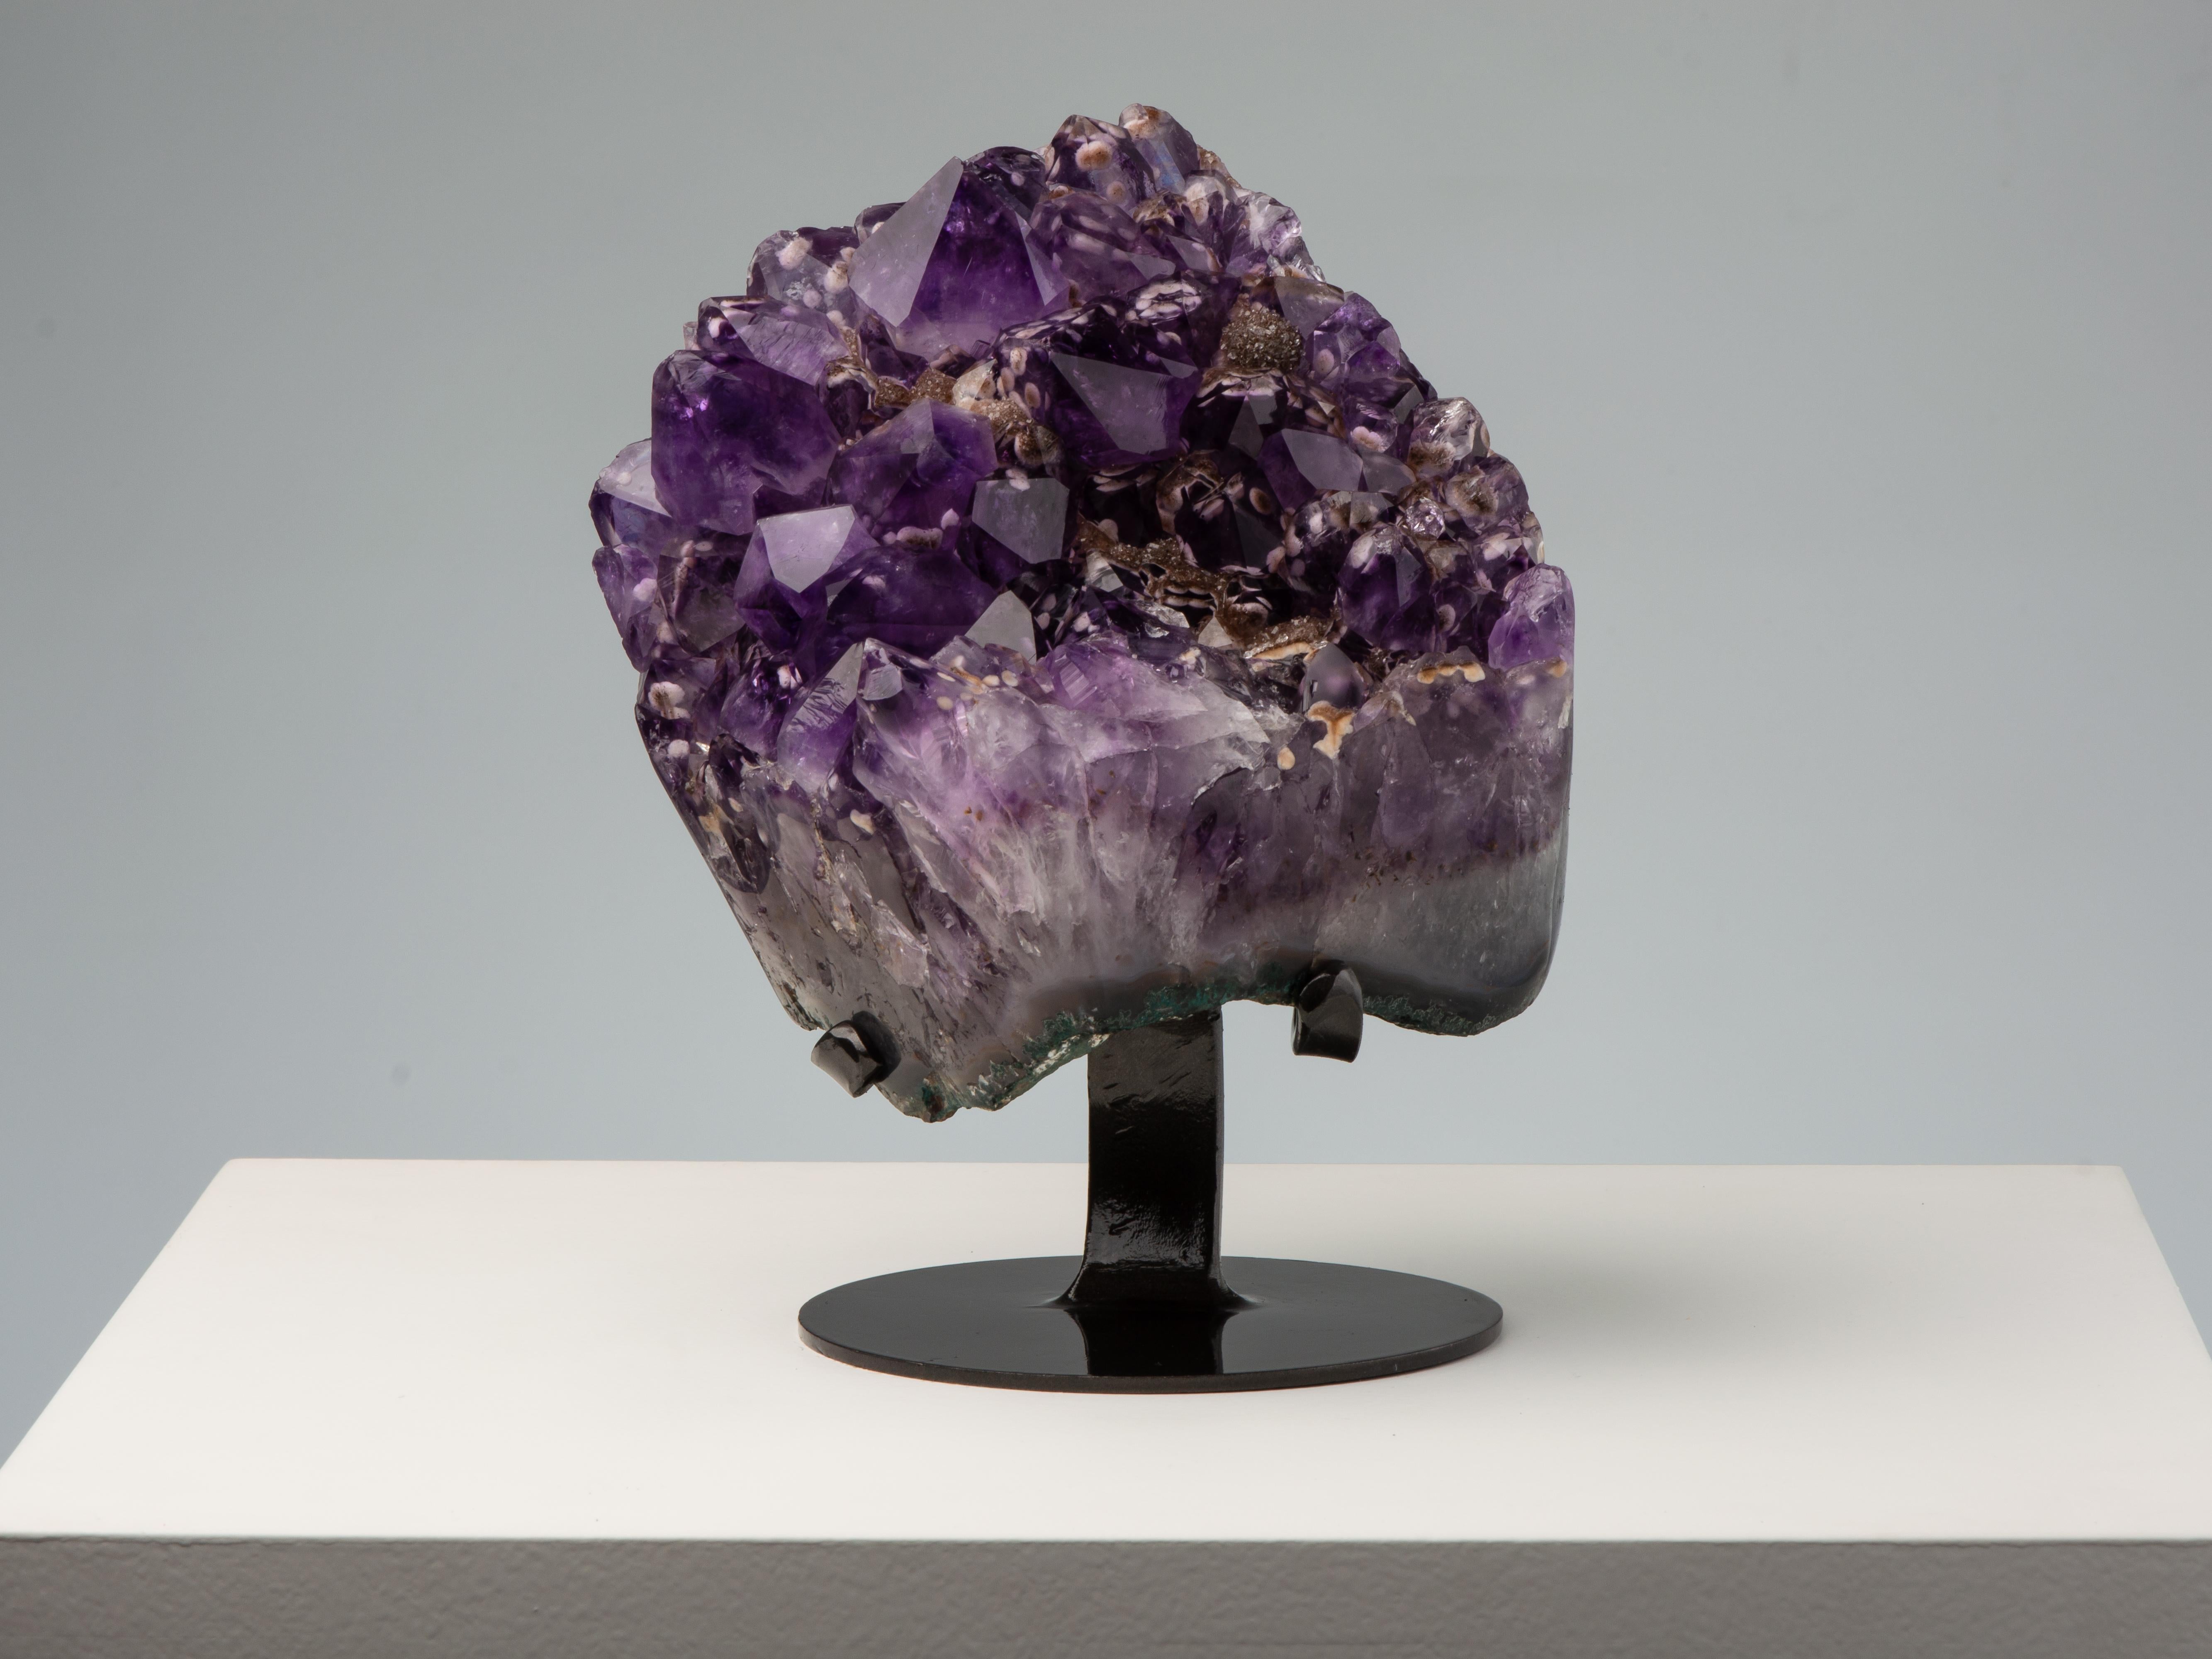 An unusual piece of high quality deep purple amethyst with large peaked crystals. Inside the amethyst multiple goethite crystals, resembling hearts and rosettes can be seen. Several of the crystals are over-coated in brown druze.

This piece was